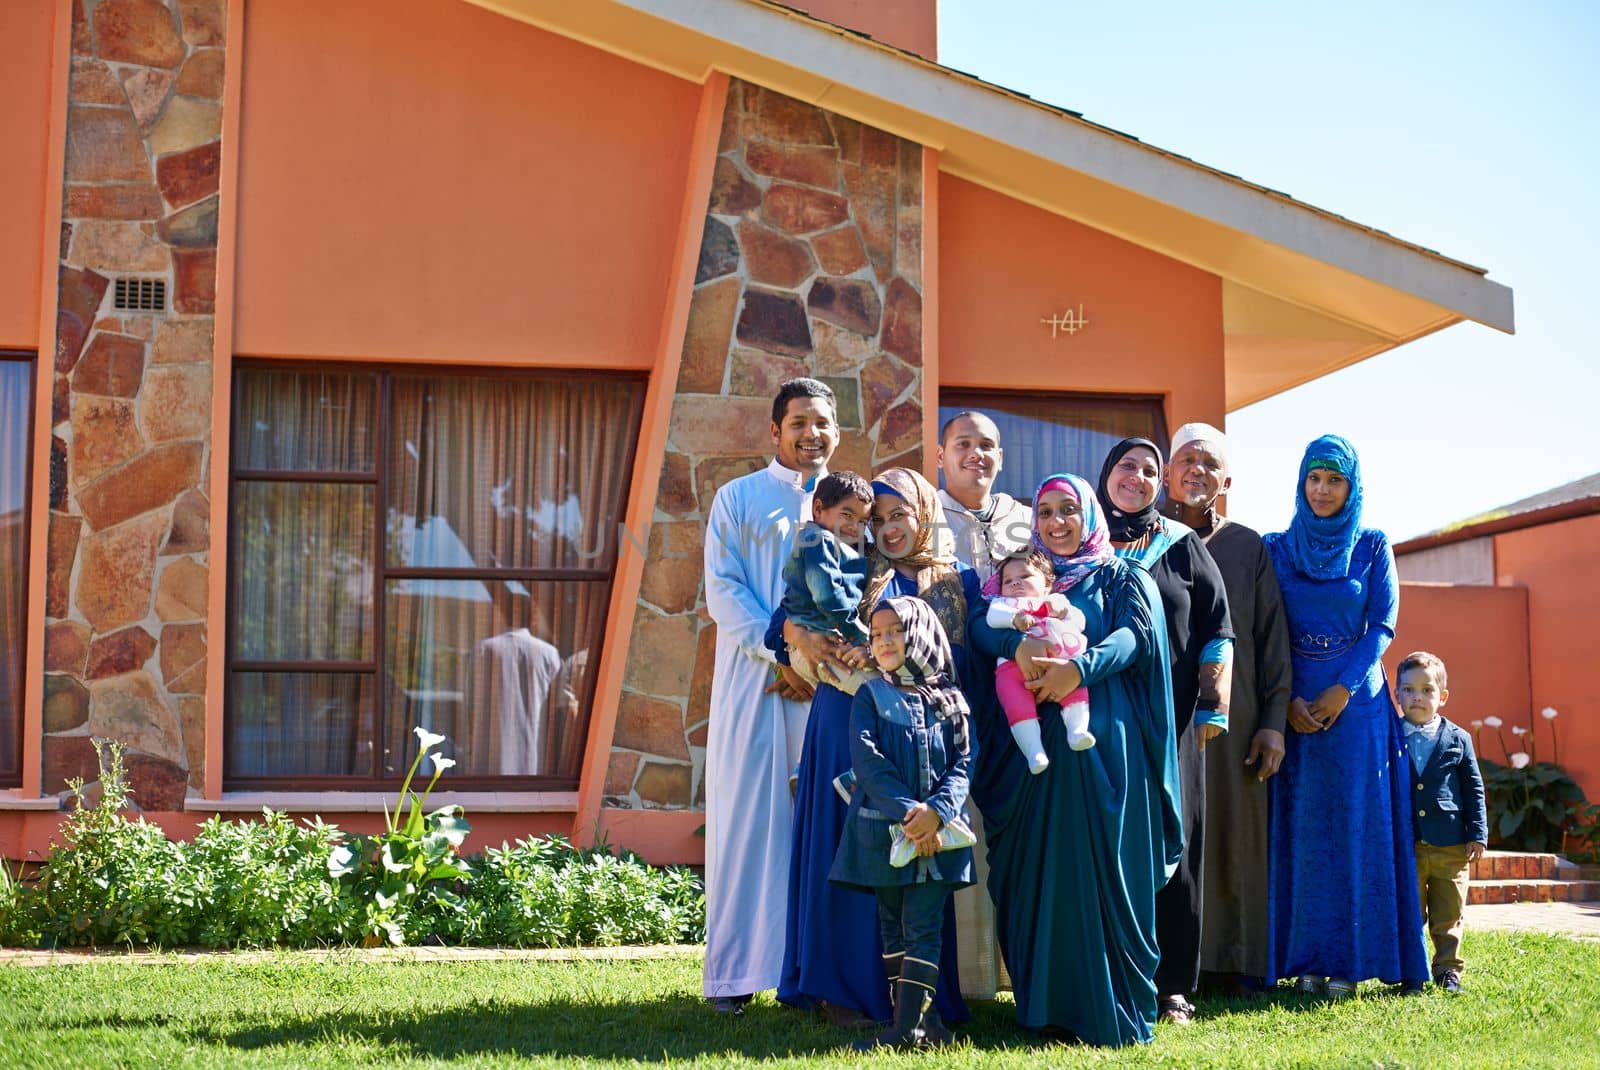 Were a family full of love. Portrait of a happy muslim family standing together in front of their house